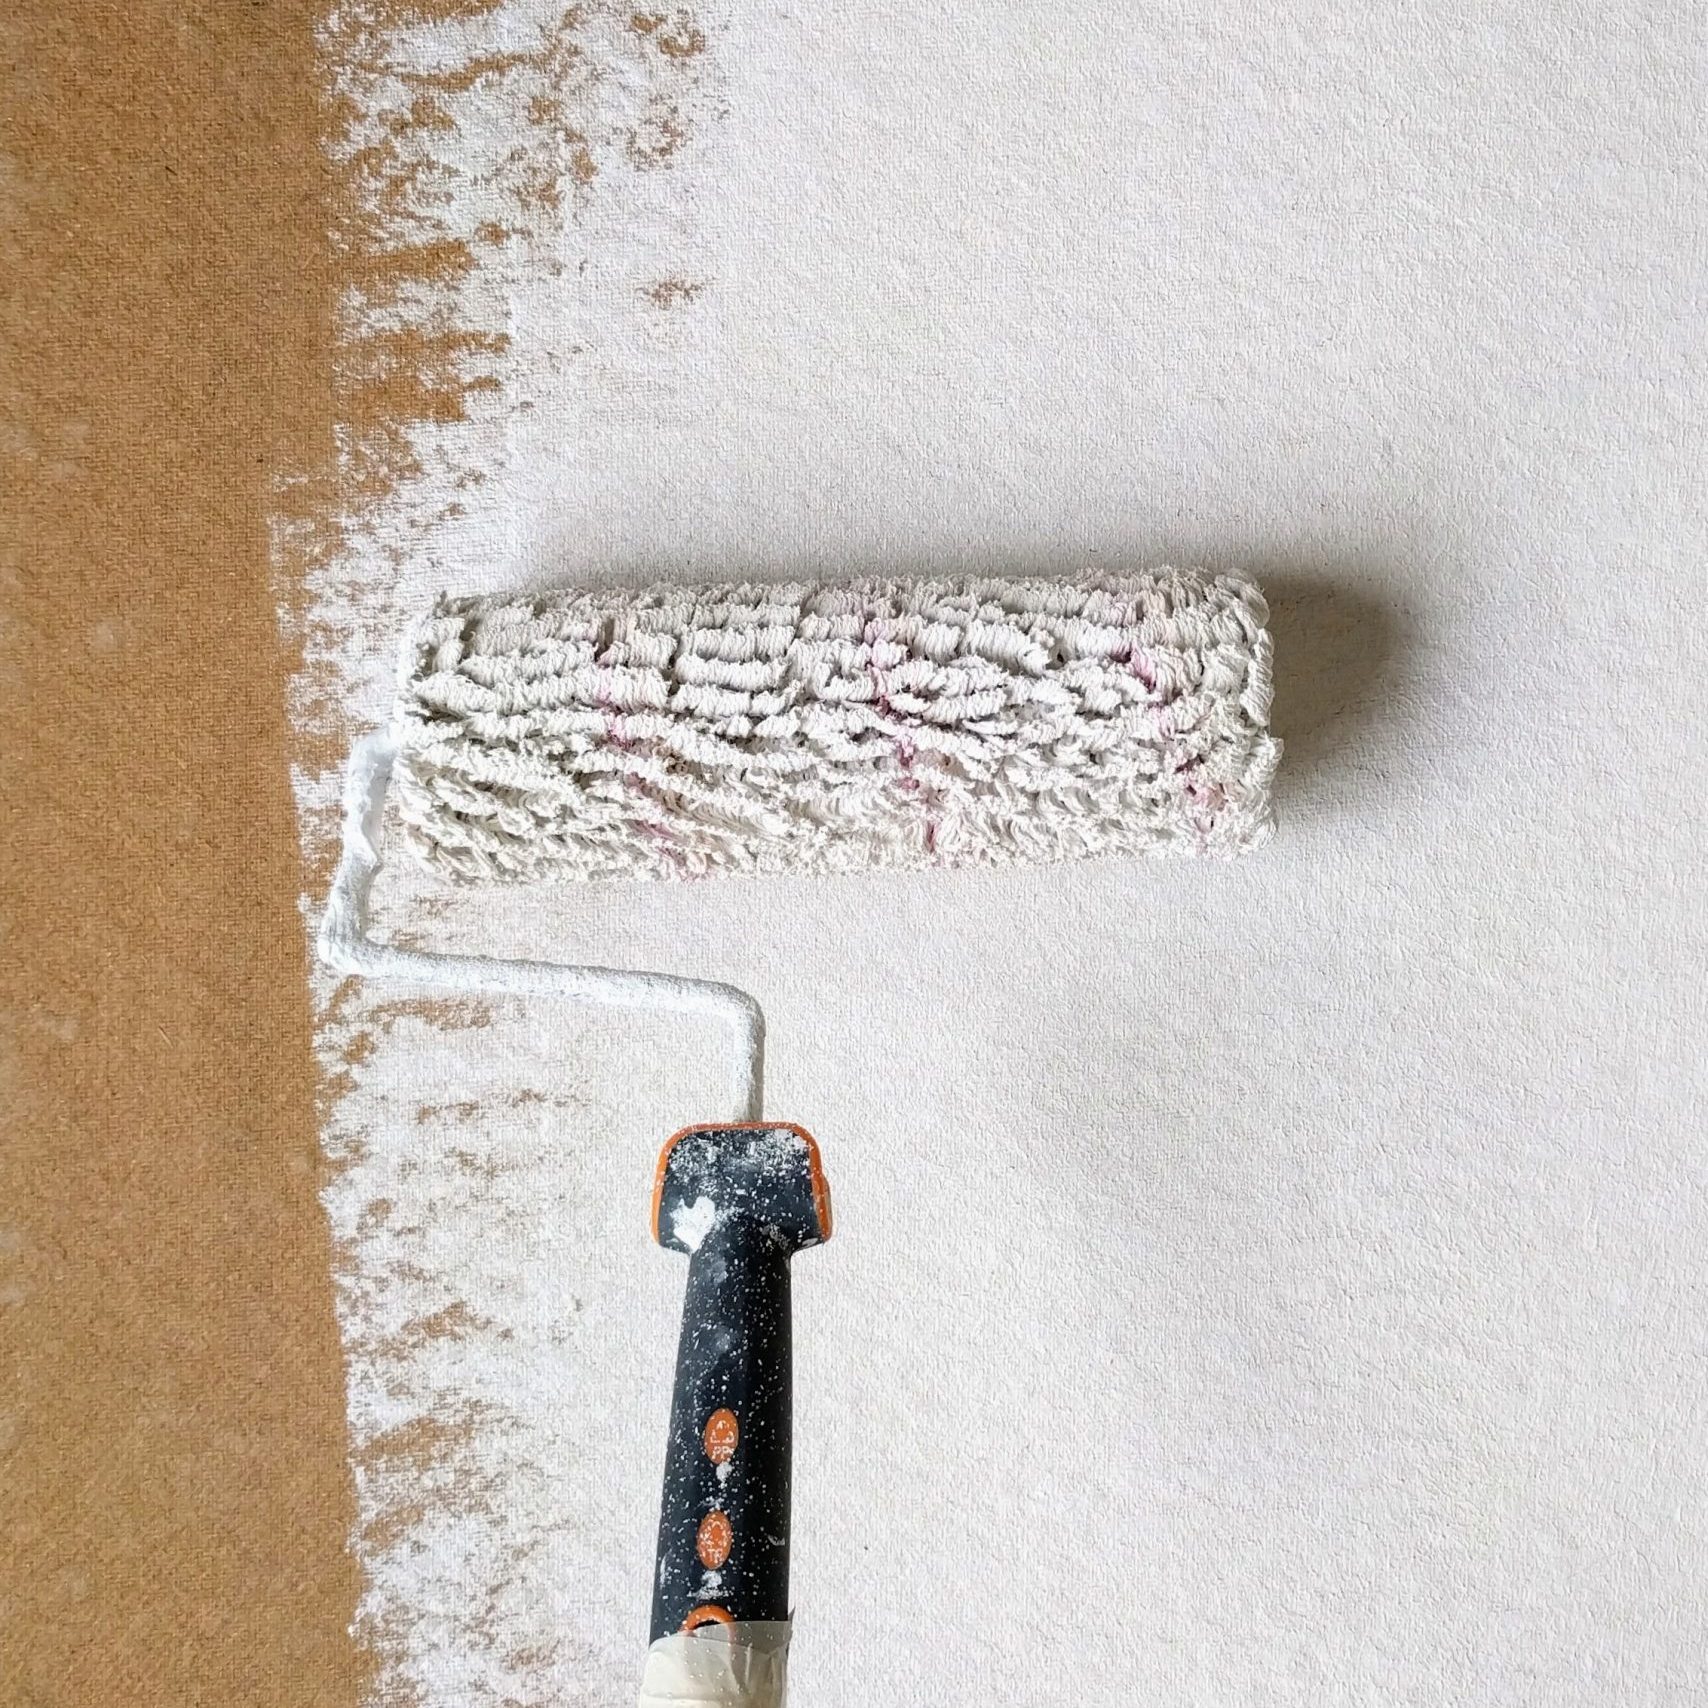 29 Painting Tool Hacks To Get Your Projects Rolling